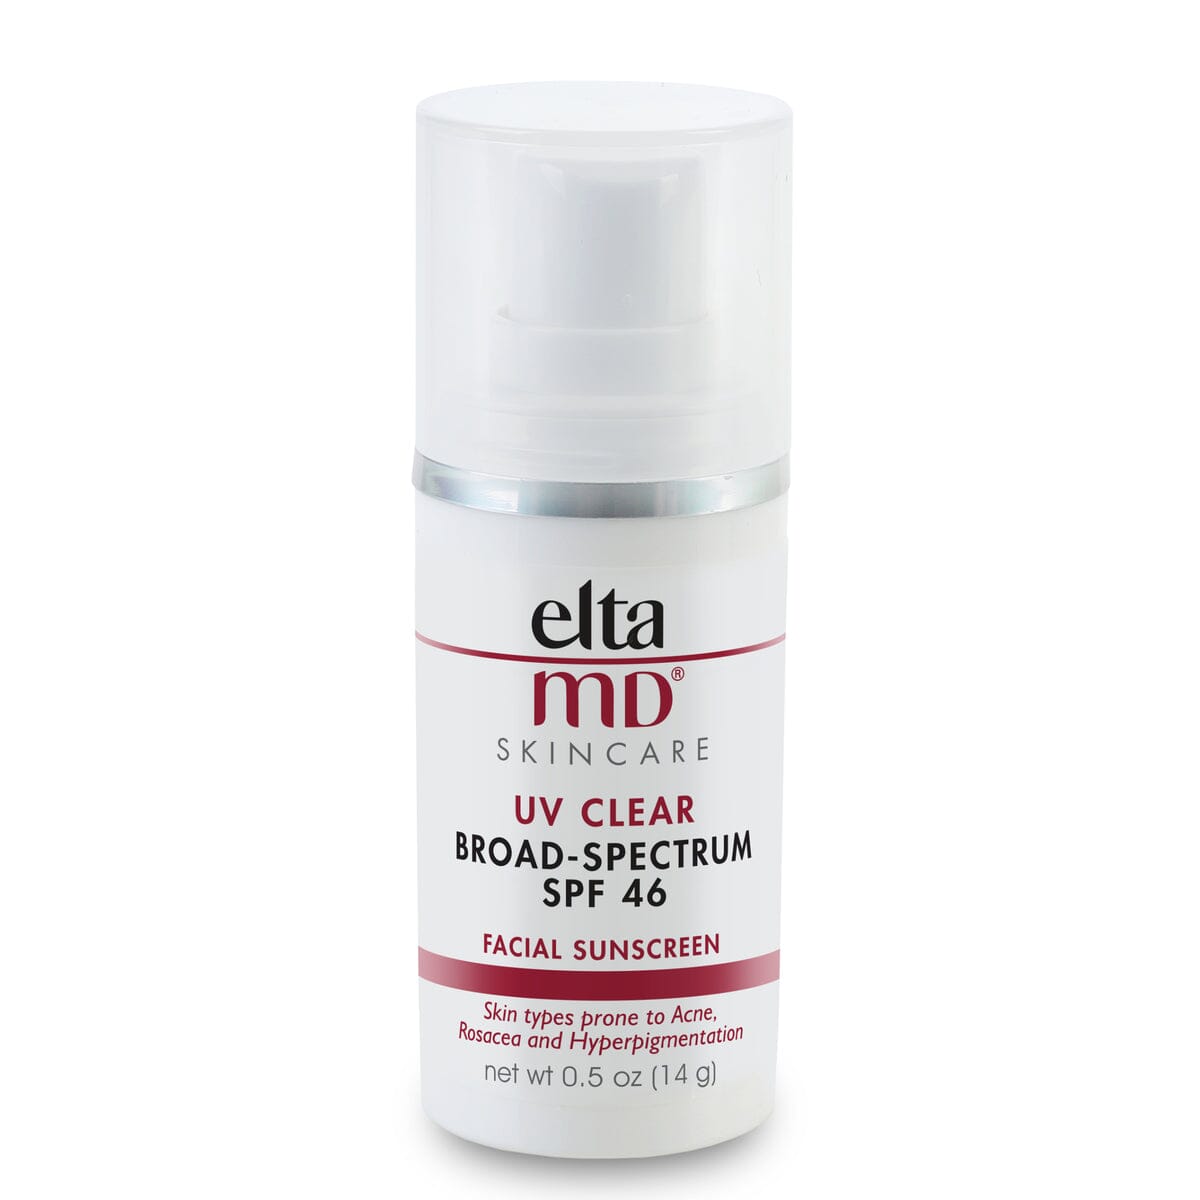 EltaMD UV Clear Broad-Spectrum SPF 46 Sunscreen EltaMD 0.5 oz. Trial Size Shop at Exclusive Beauty Club